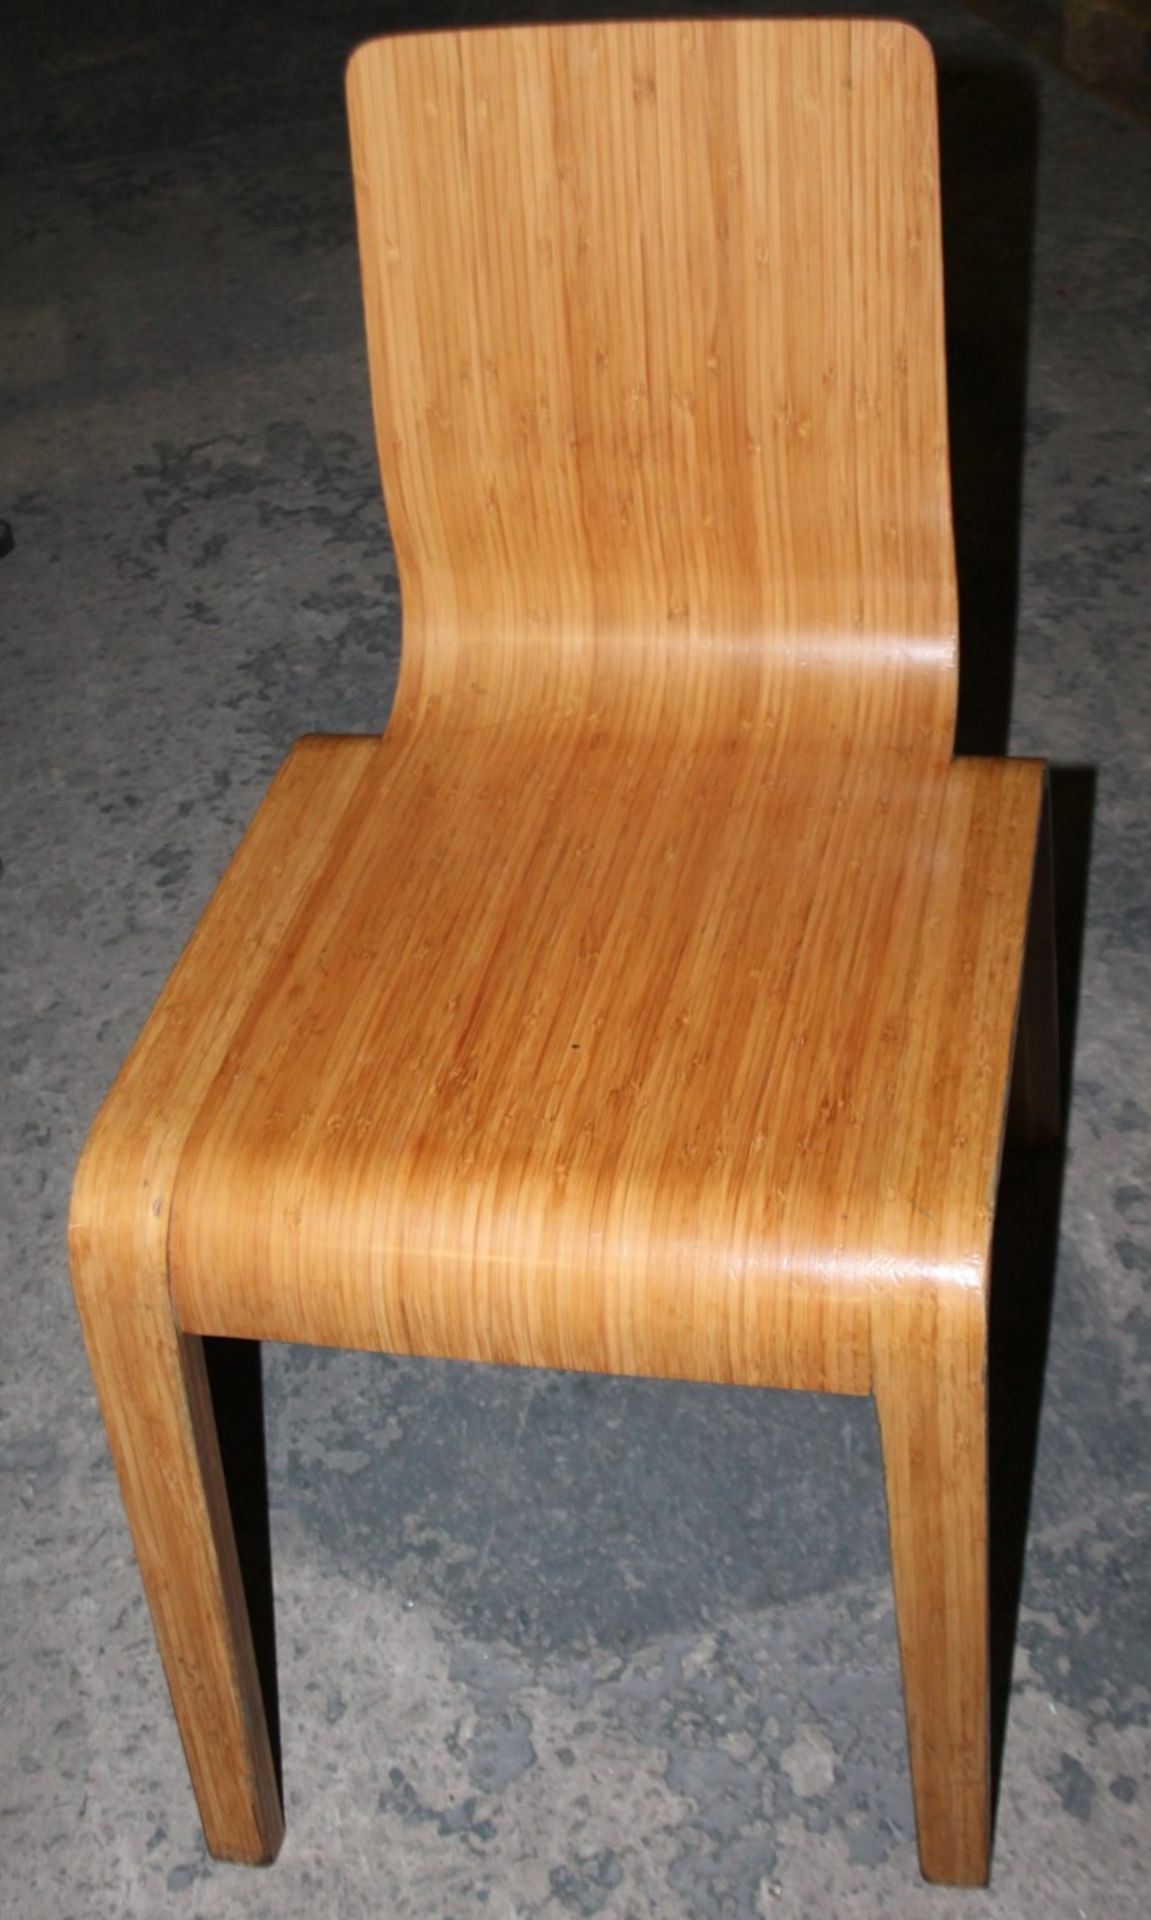 1 x Stylish Wooden Chair With A Curved Design - Dimensions: H80 x W42 x D58cm / Seat 44cm - Ref: - Image 3 of 4